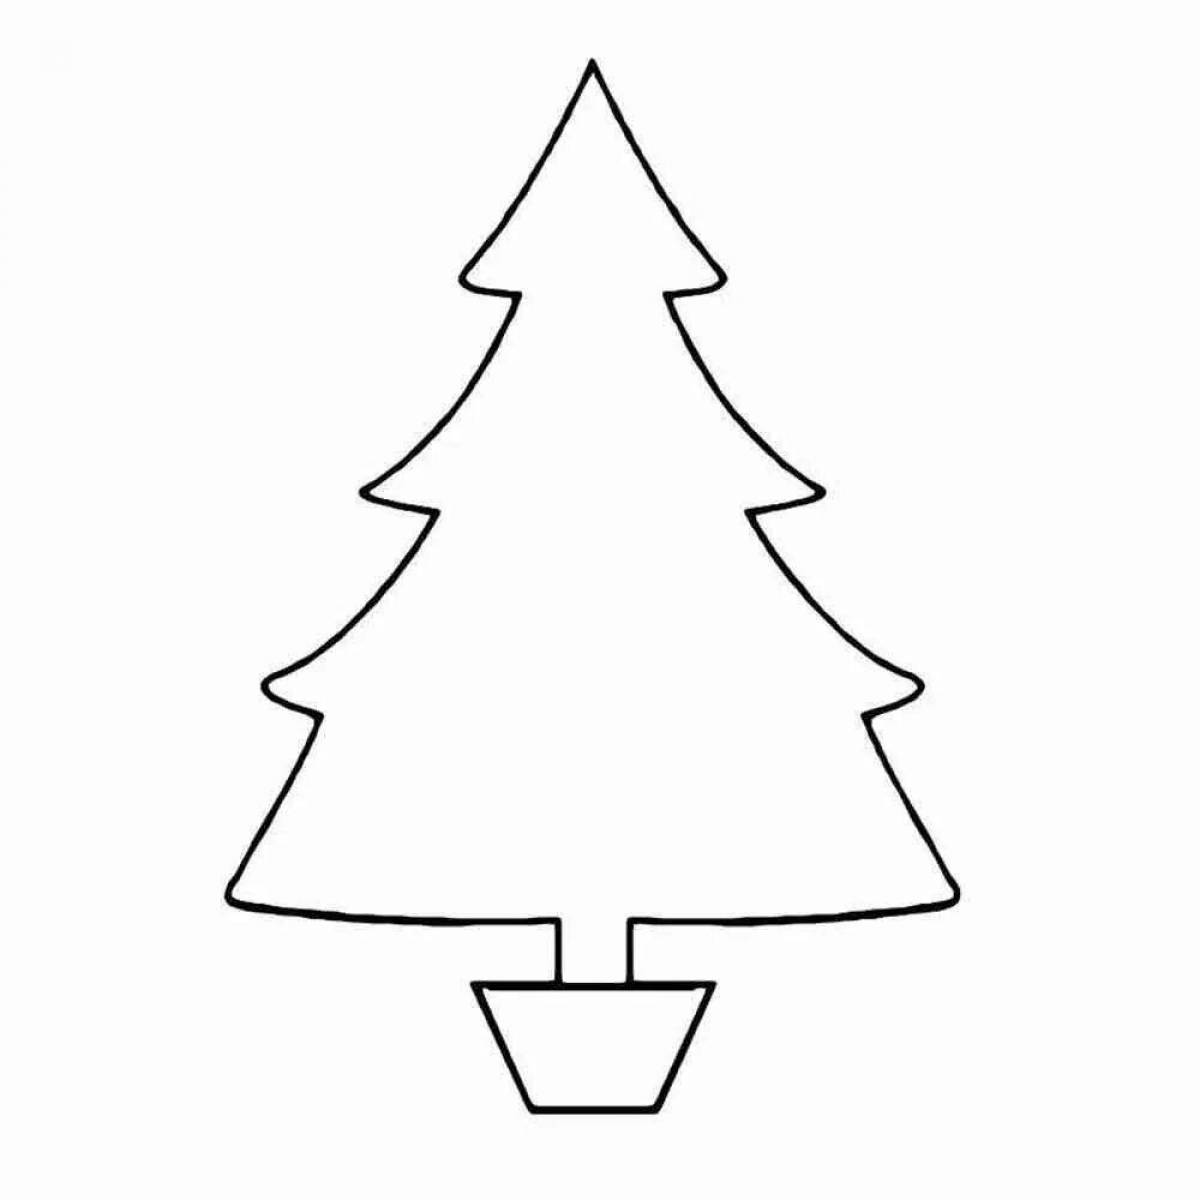 Cute little Christmas tree coloring book